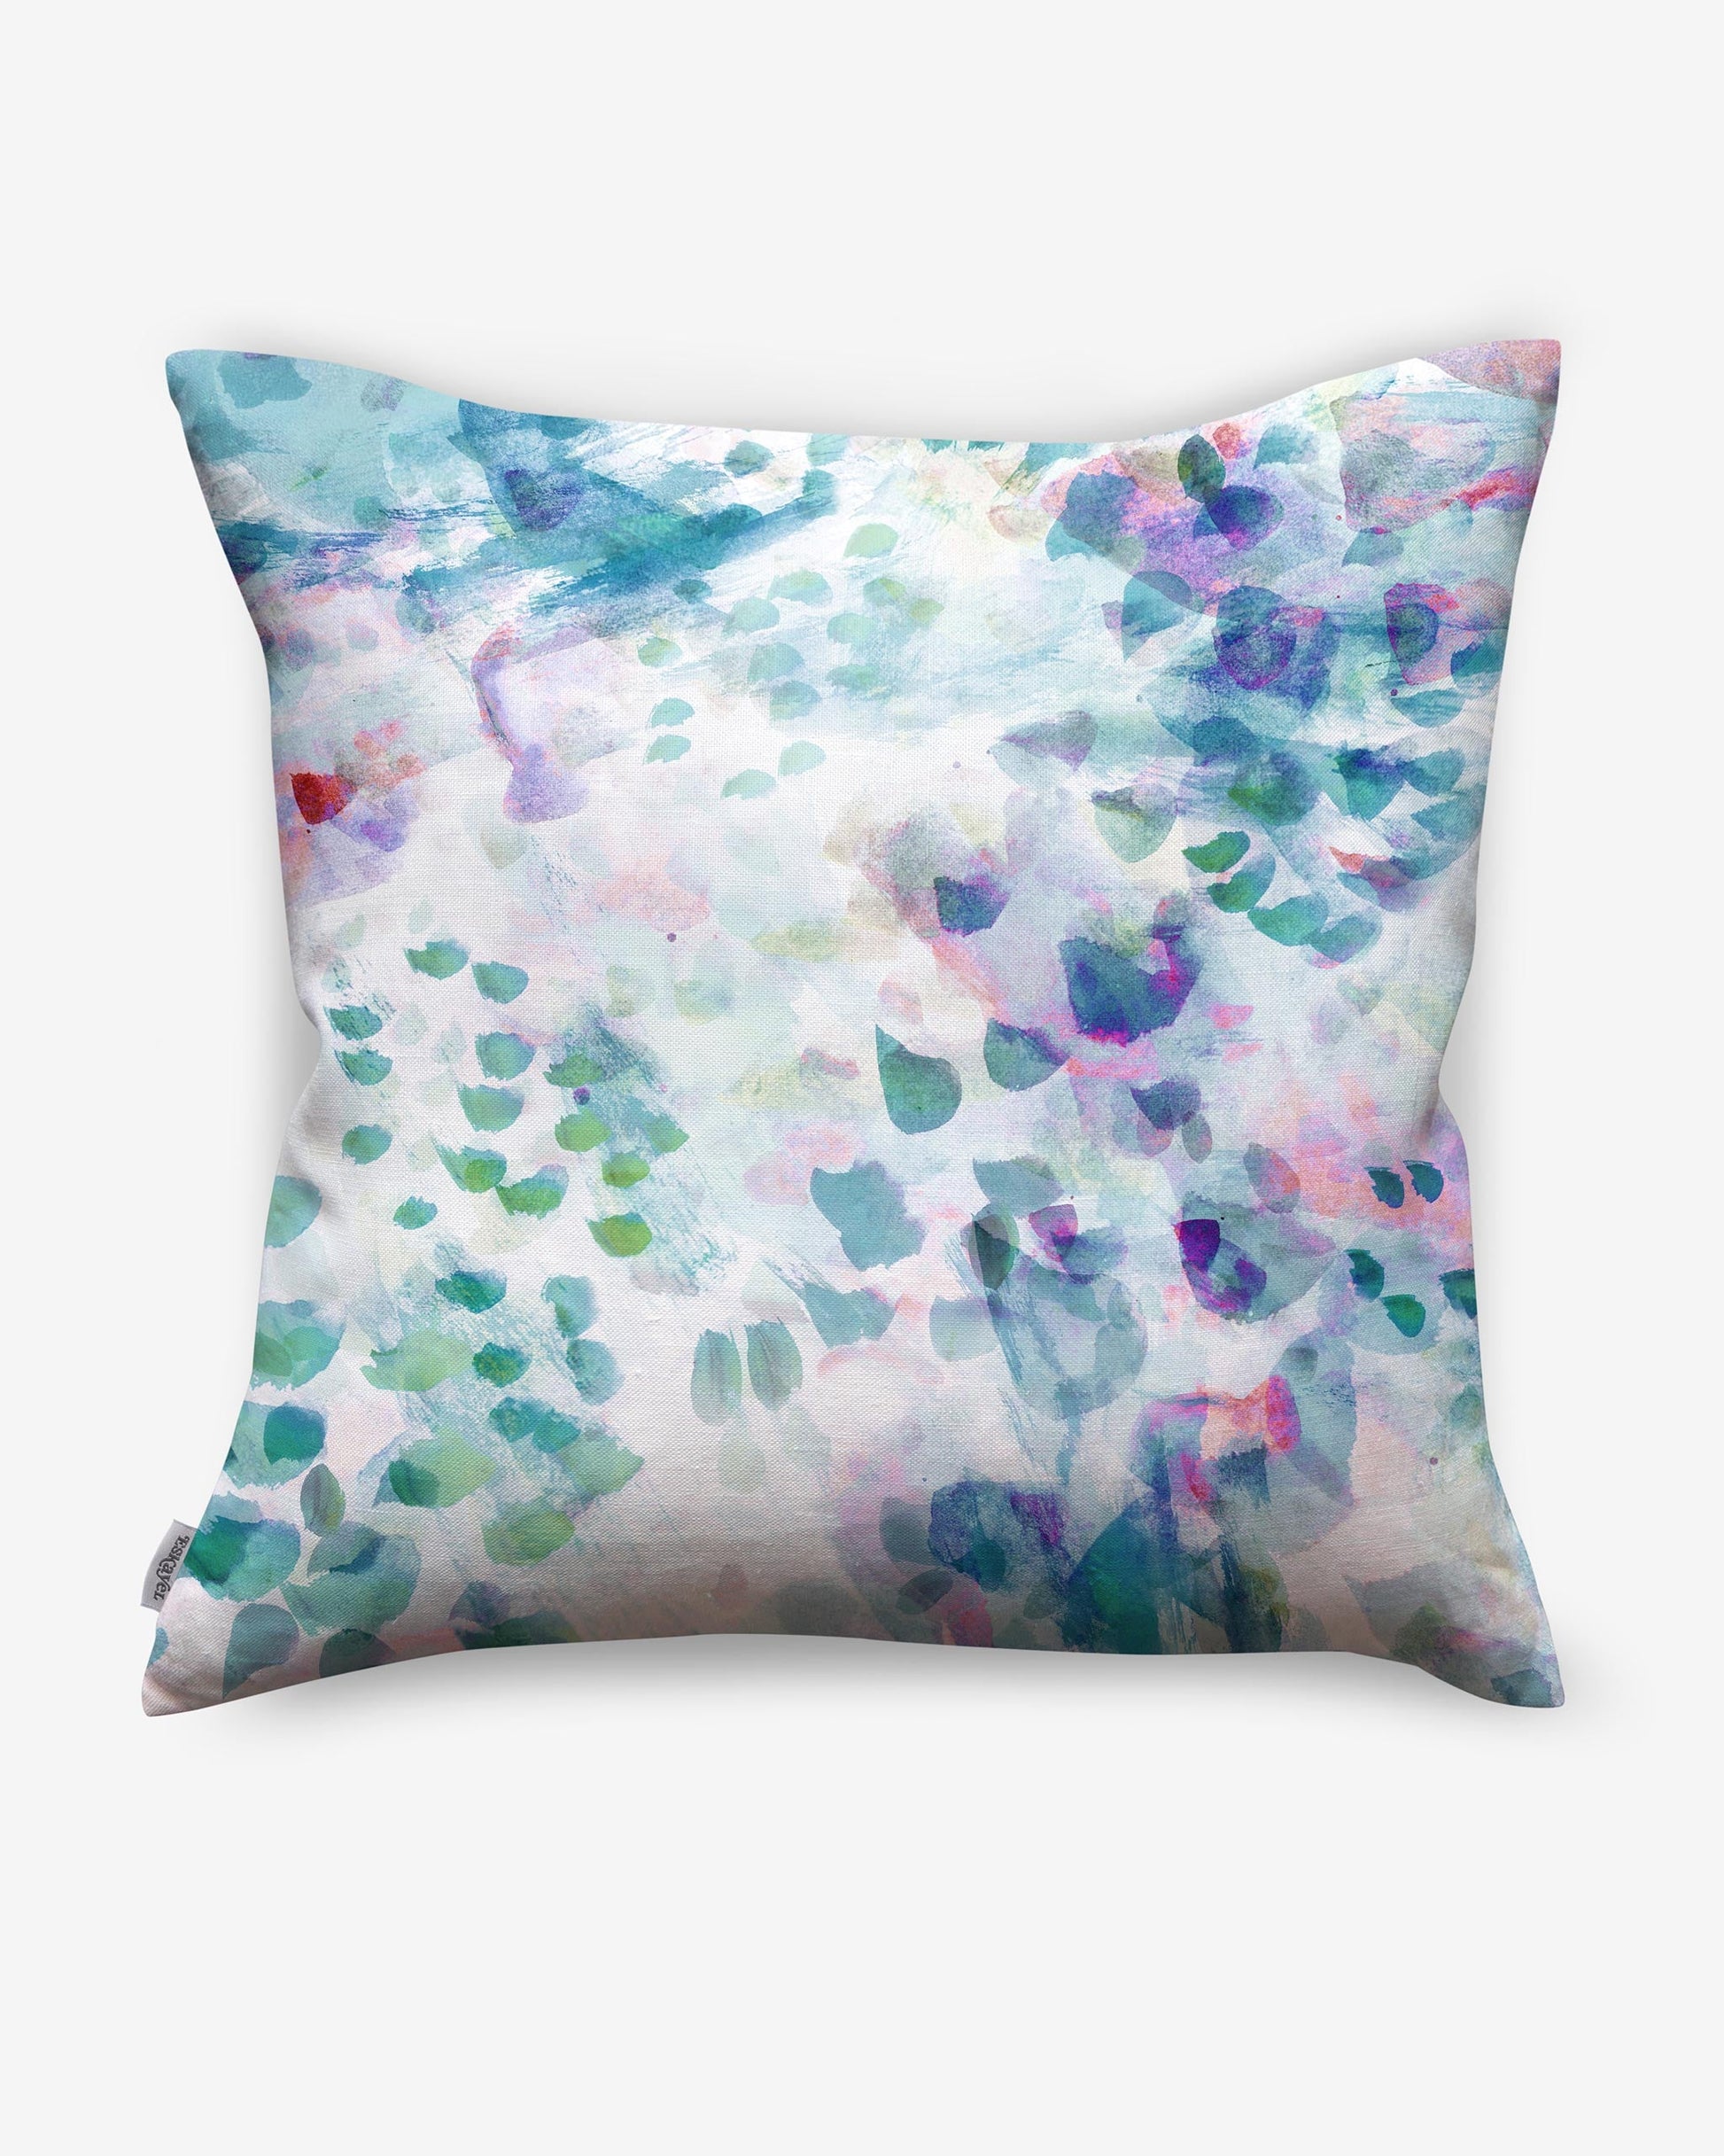 A Spectra pillow with vibrant pops of color and a Felidae pattern on luxury fabric